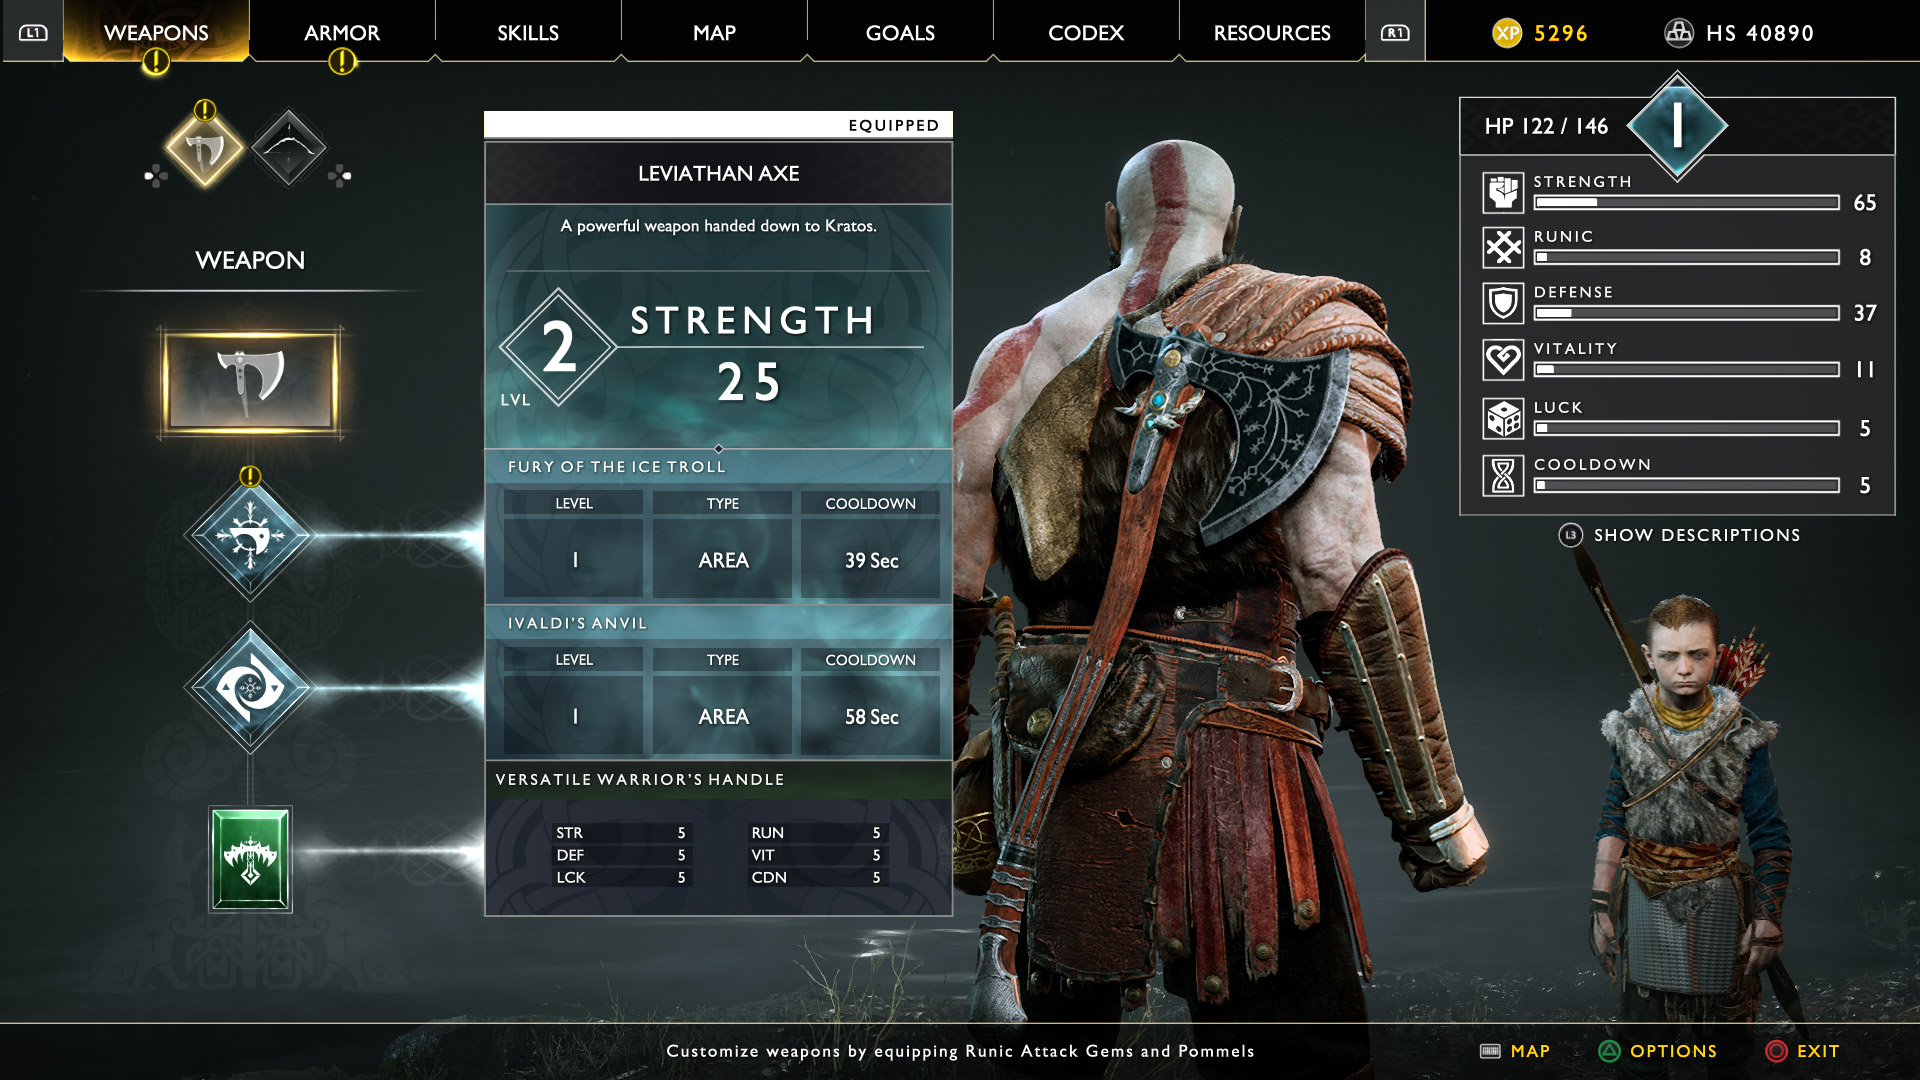 GoW Interface